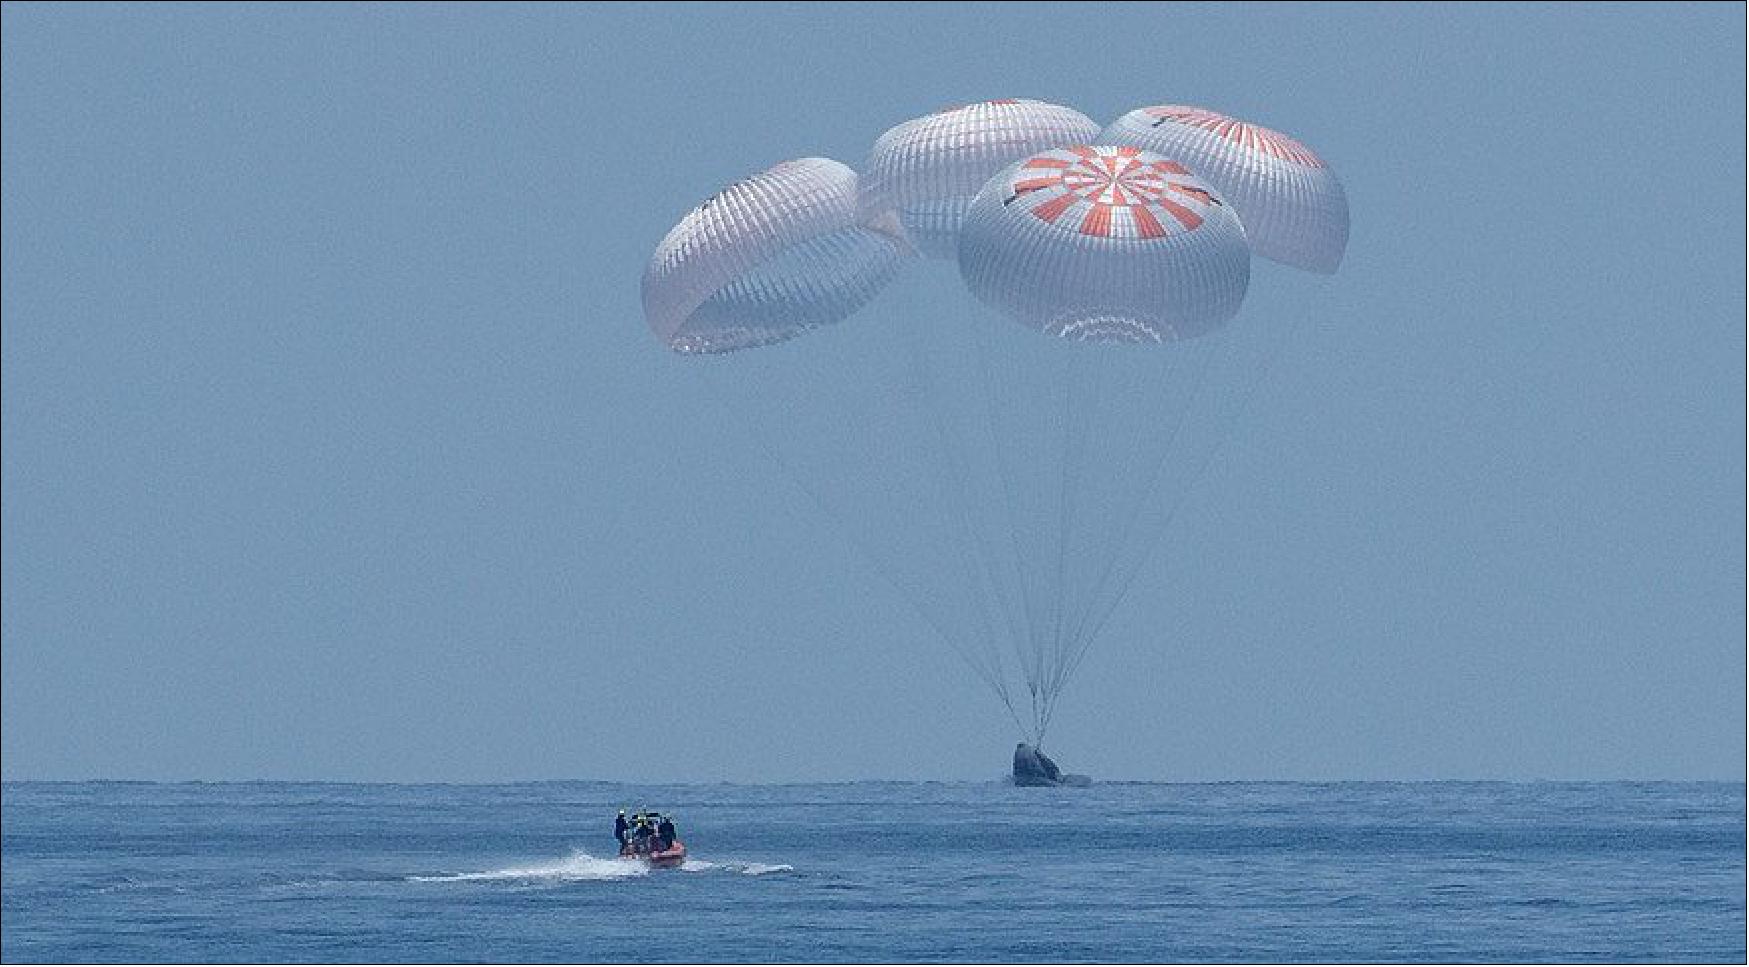 Figure 5: A SpaceX Crew Dragon spacecraft splashes down in the Gulf of Mexico Aug. 2 to conclude the Demo-2 commercial crew test flight (image credit: NASA/Bill Ingalls)